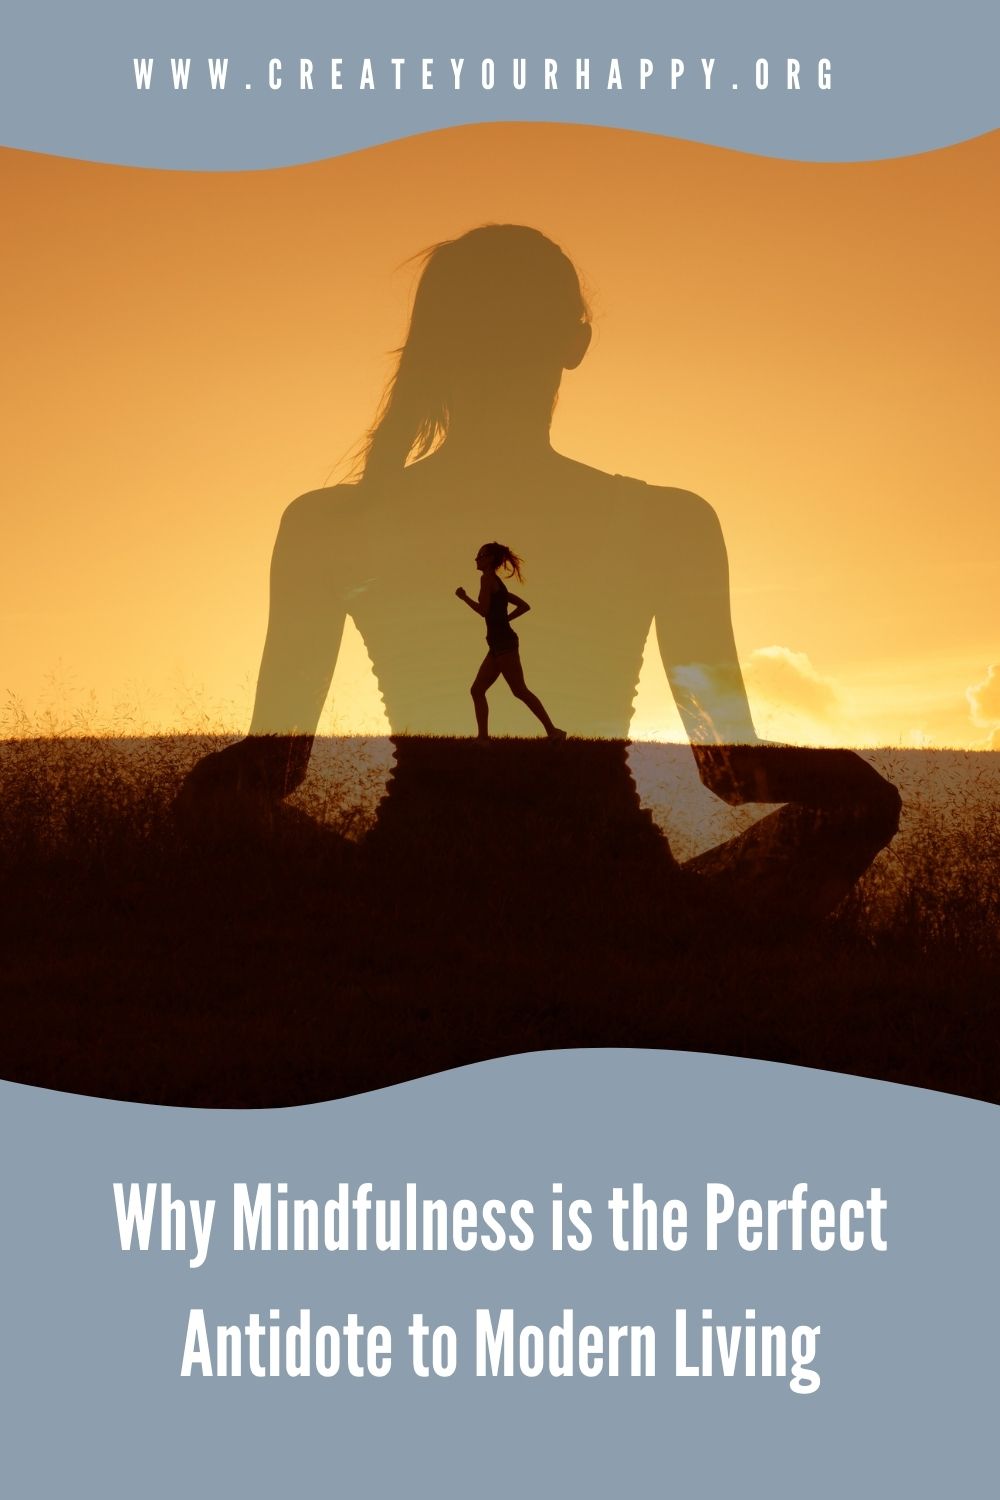 Why Mindfulness is the Perfect Antidote to Modern Living